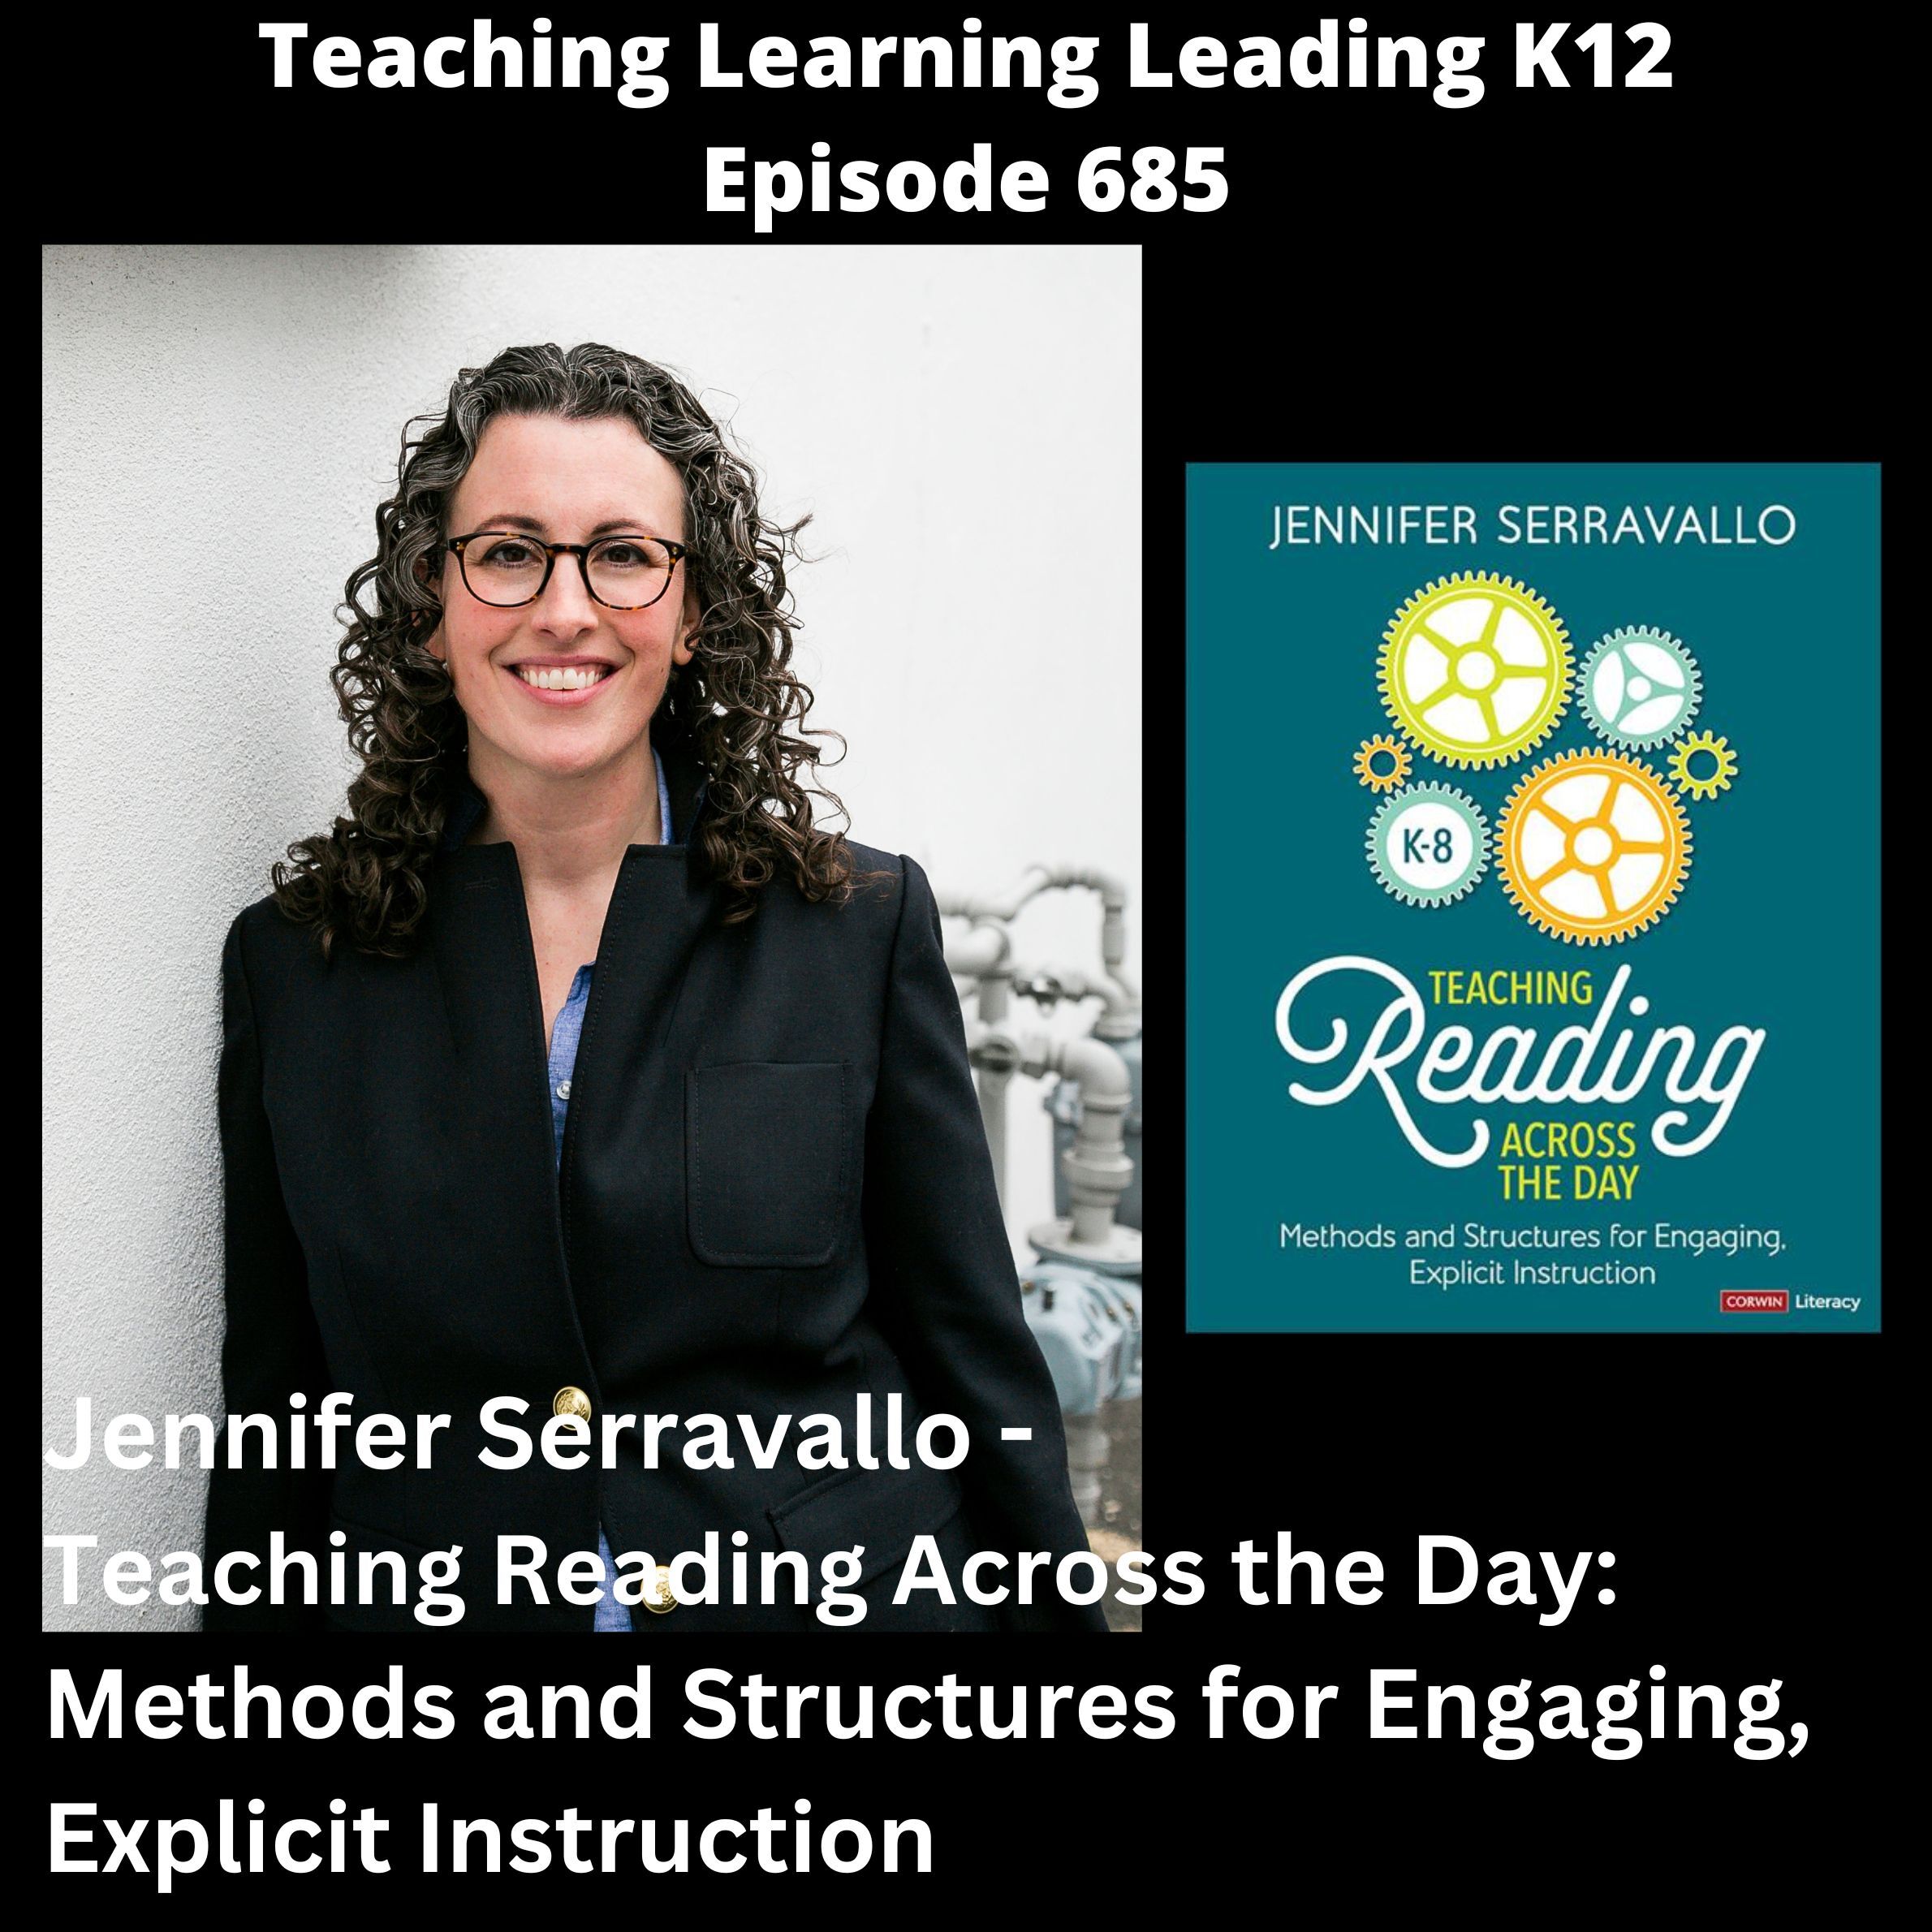 Jennifer Serravallo - Teaching Reading Across the Day: Methods and Structures for Engaging, Explicit Instruction - 685